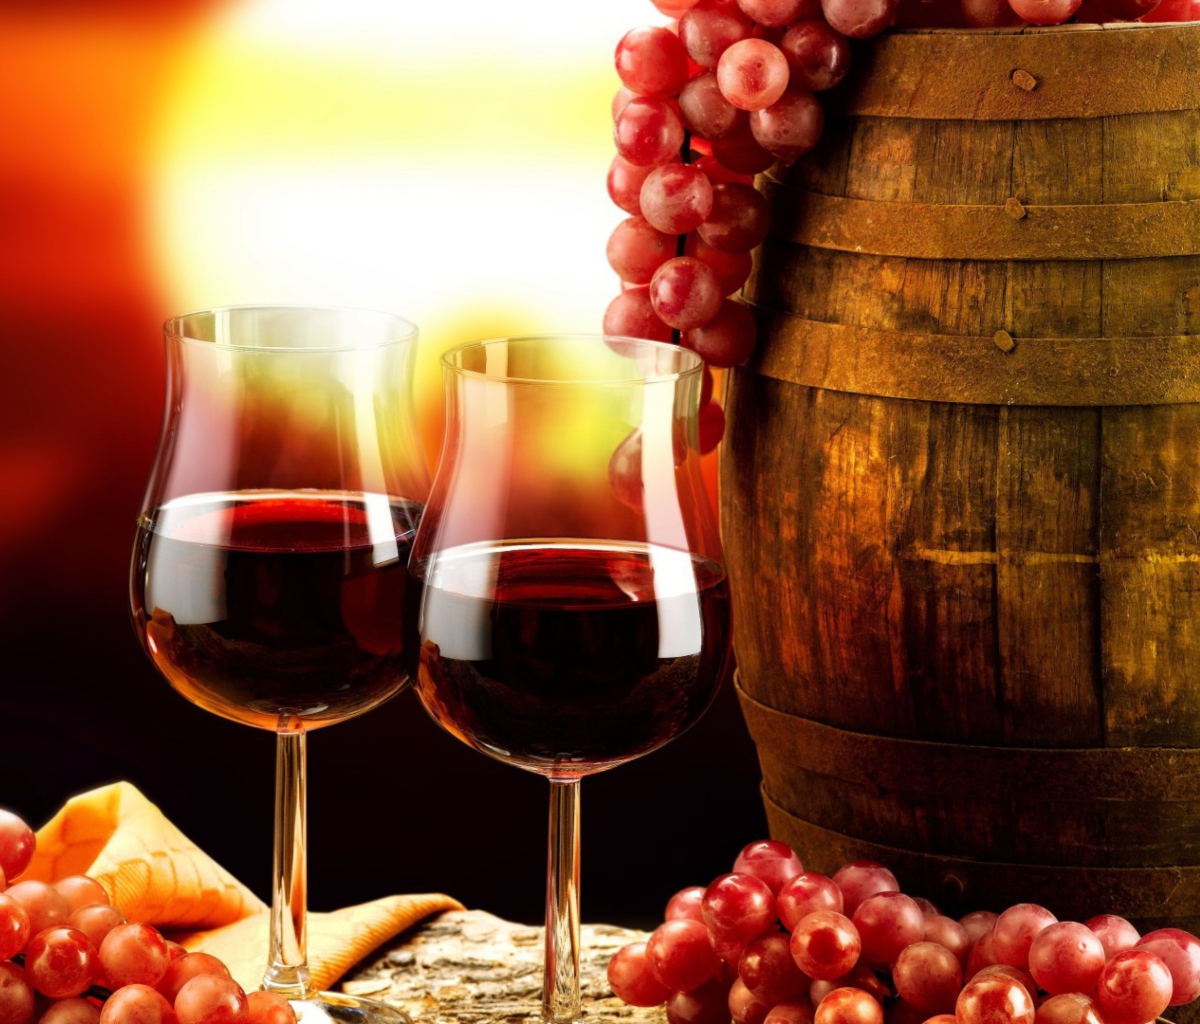 Red Wine And Grapes wallpaper 1200x1024